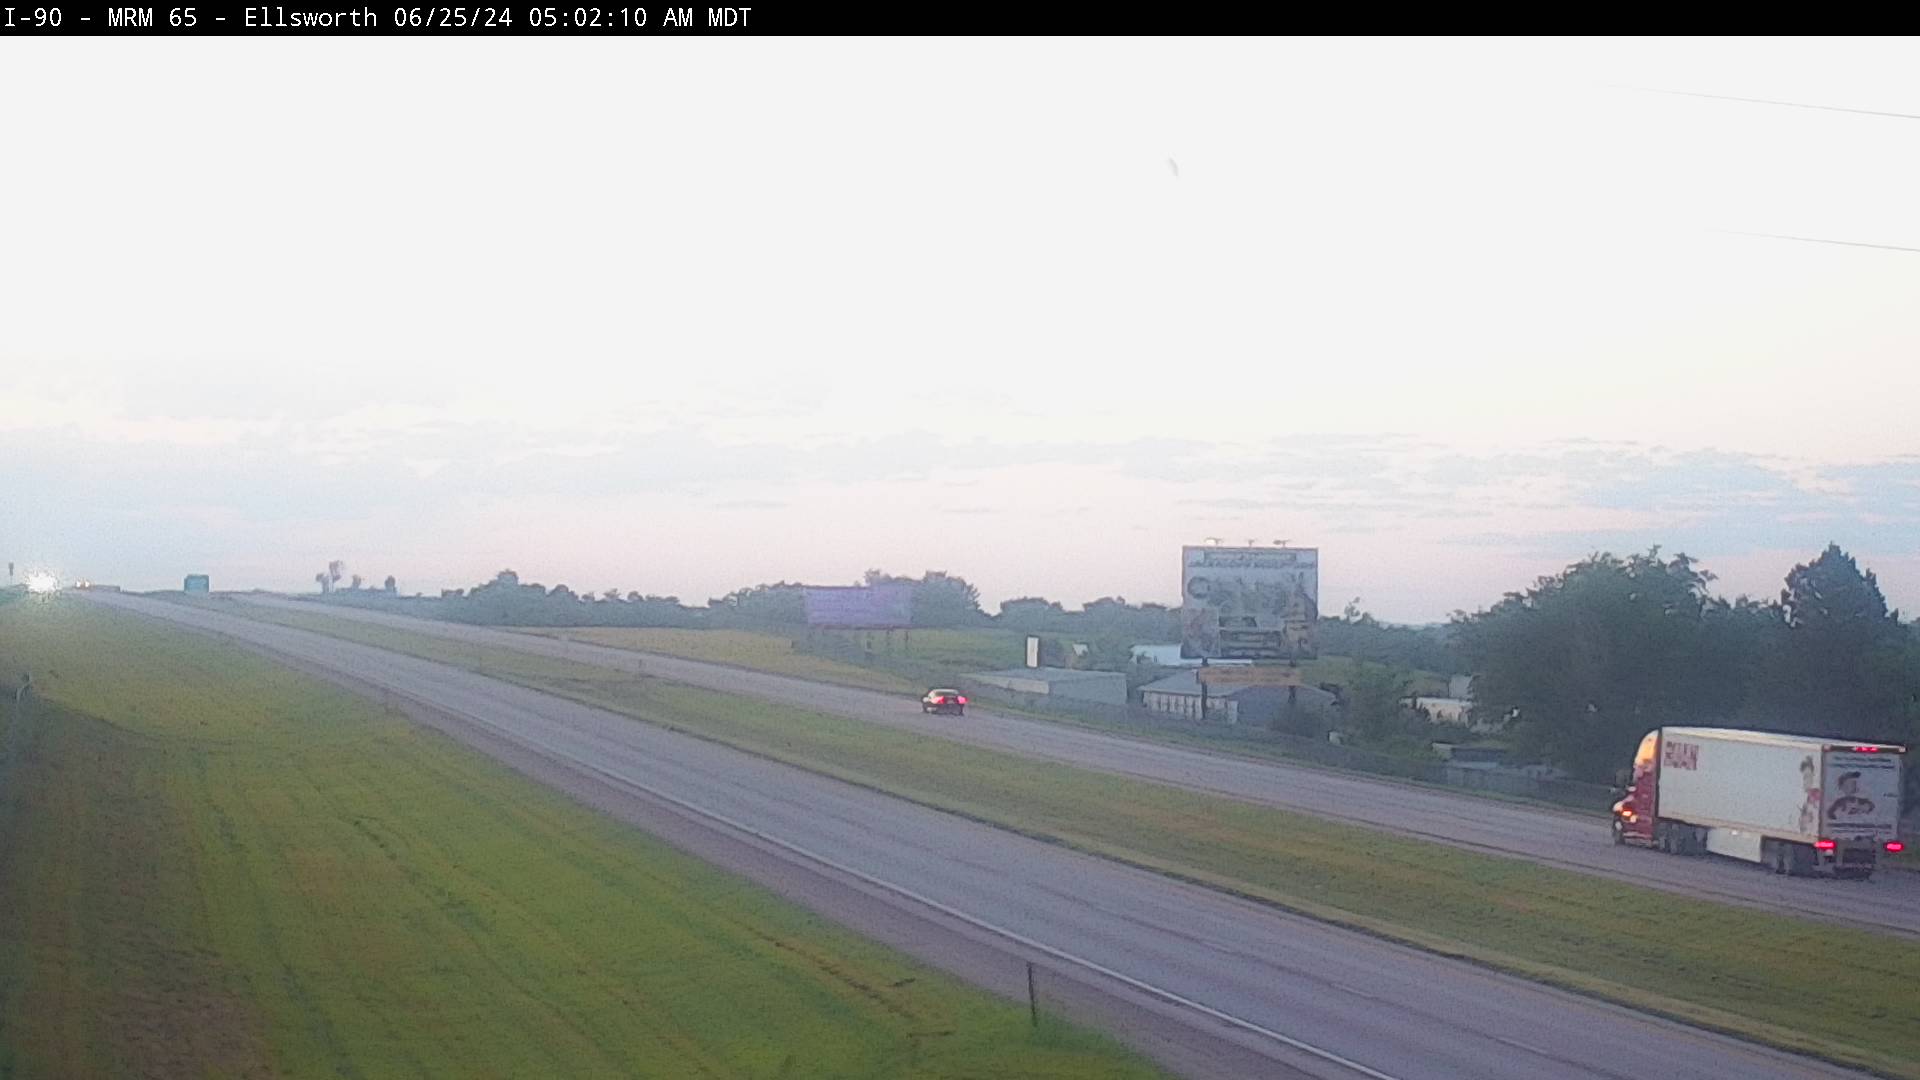 Traffic Cam 4 miles east of town along I-90 @ MP 65.2 - East Player